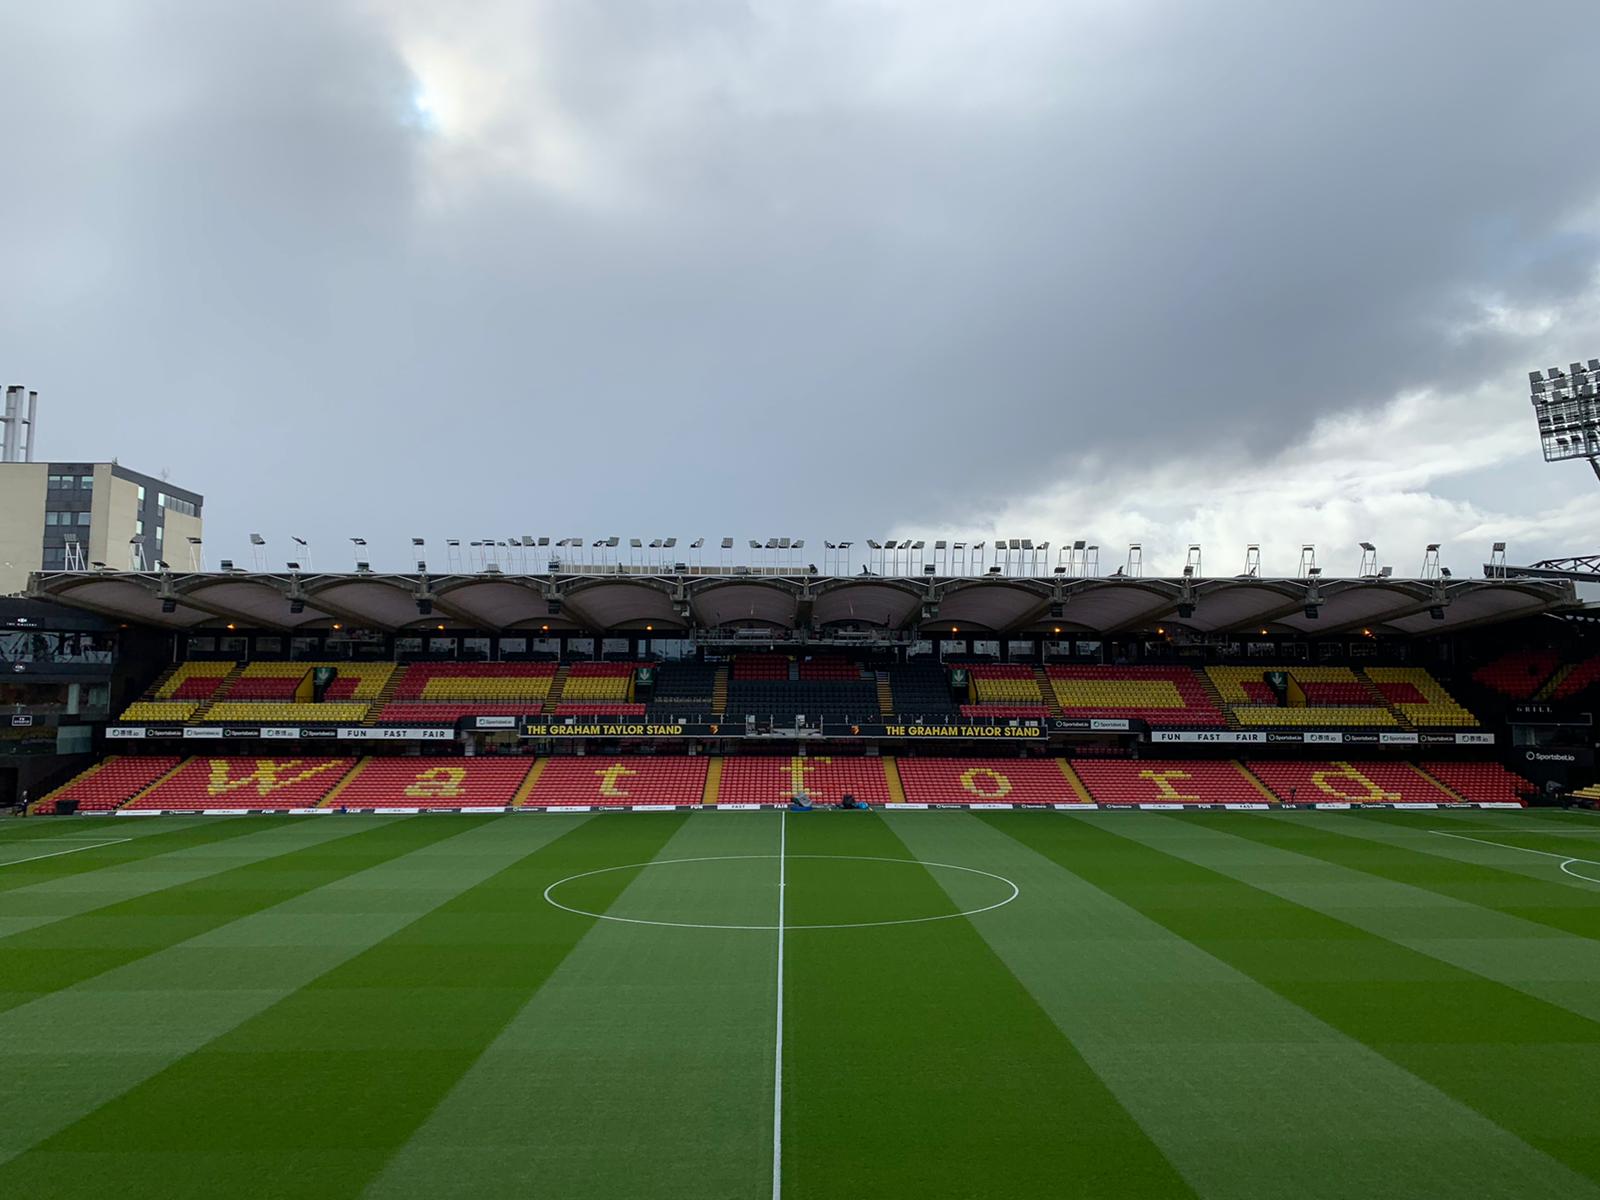 Not playing at Vicarage Road has no semblance of any sporting integrity, claims Scott Duxbury